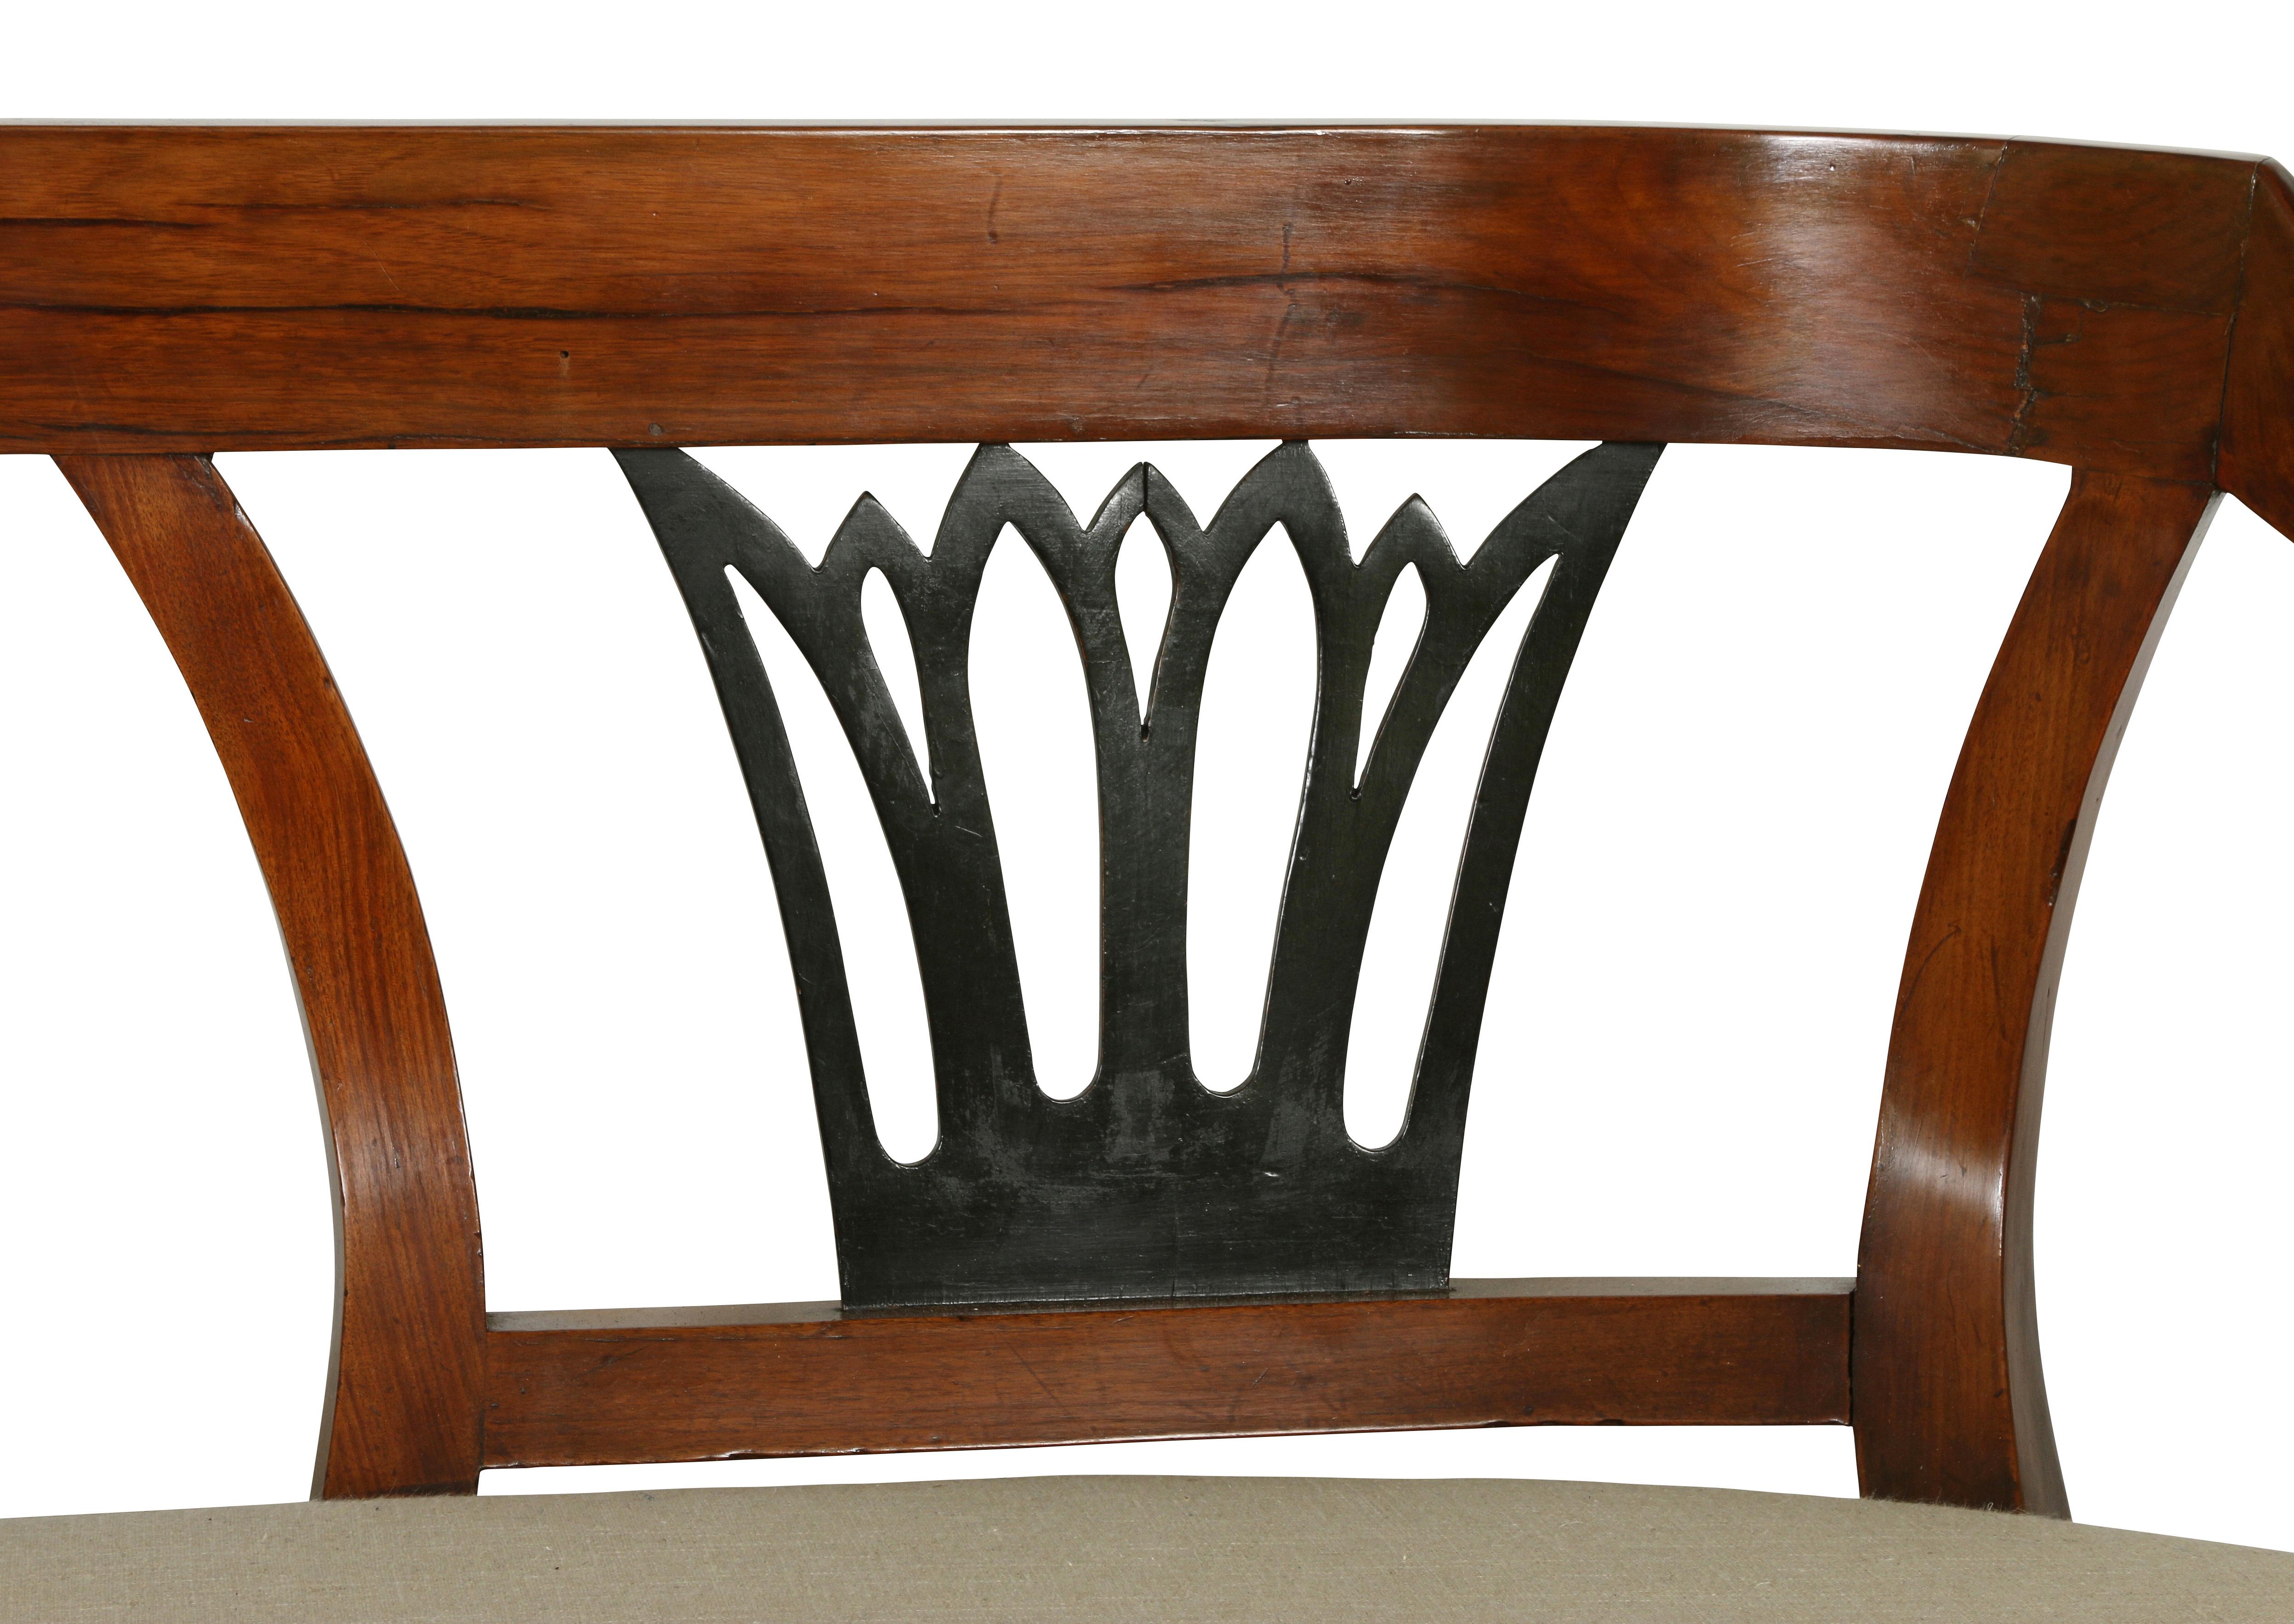 A very nice looking Biedermeier long bench with graceful lines. The splat back is divided into three sections with a stylized design in an ebonized finish. The arms have a lovely curve to them and the piece is supported by elegant saber legs. The